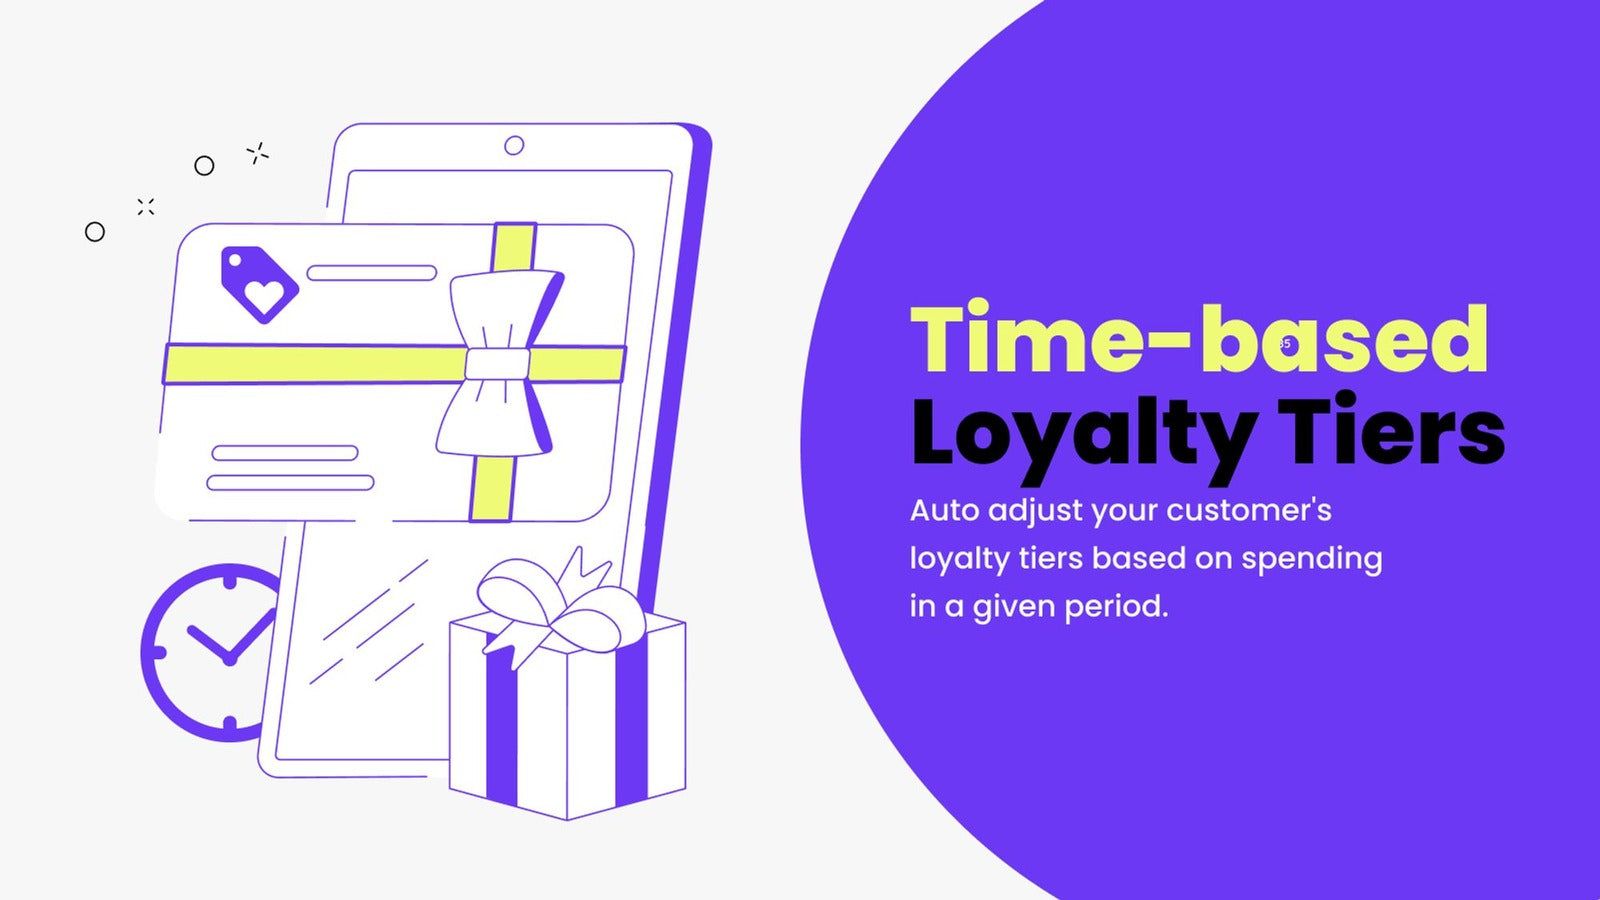 Time-based Loyalty Tiers